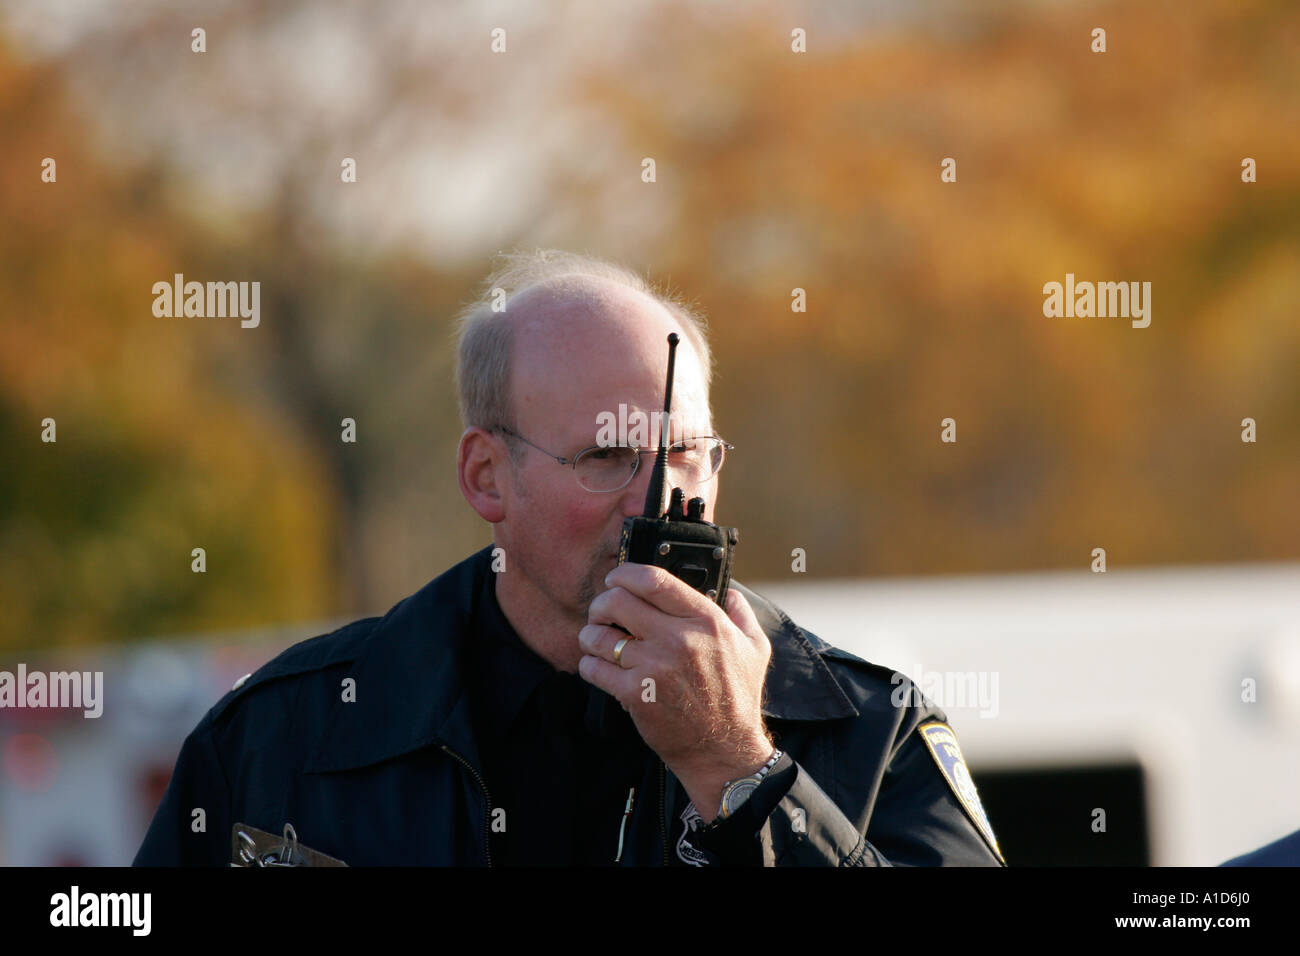 A police detective talking on a radio Stock Photo